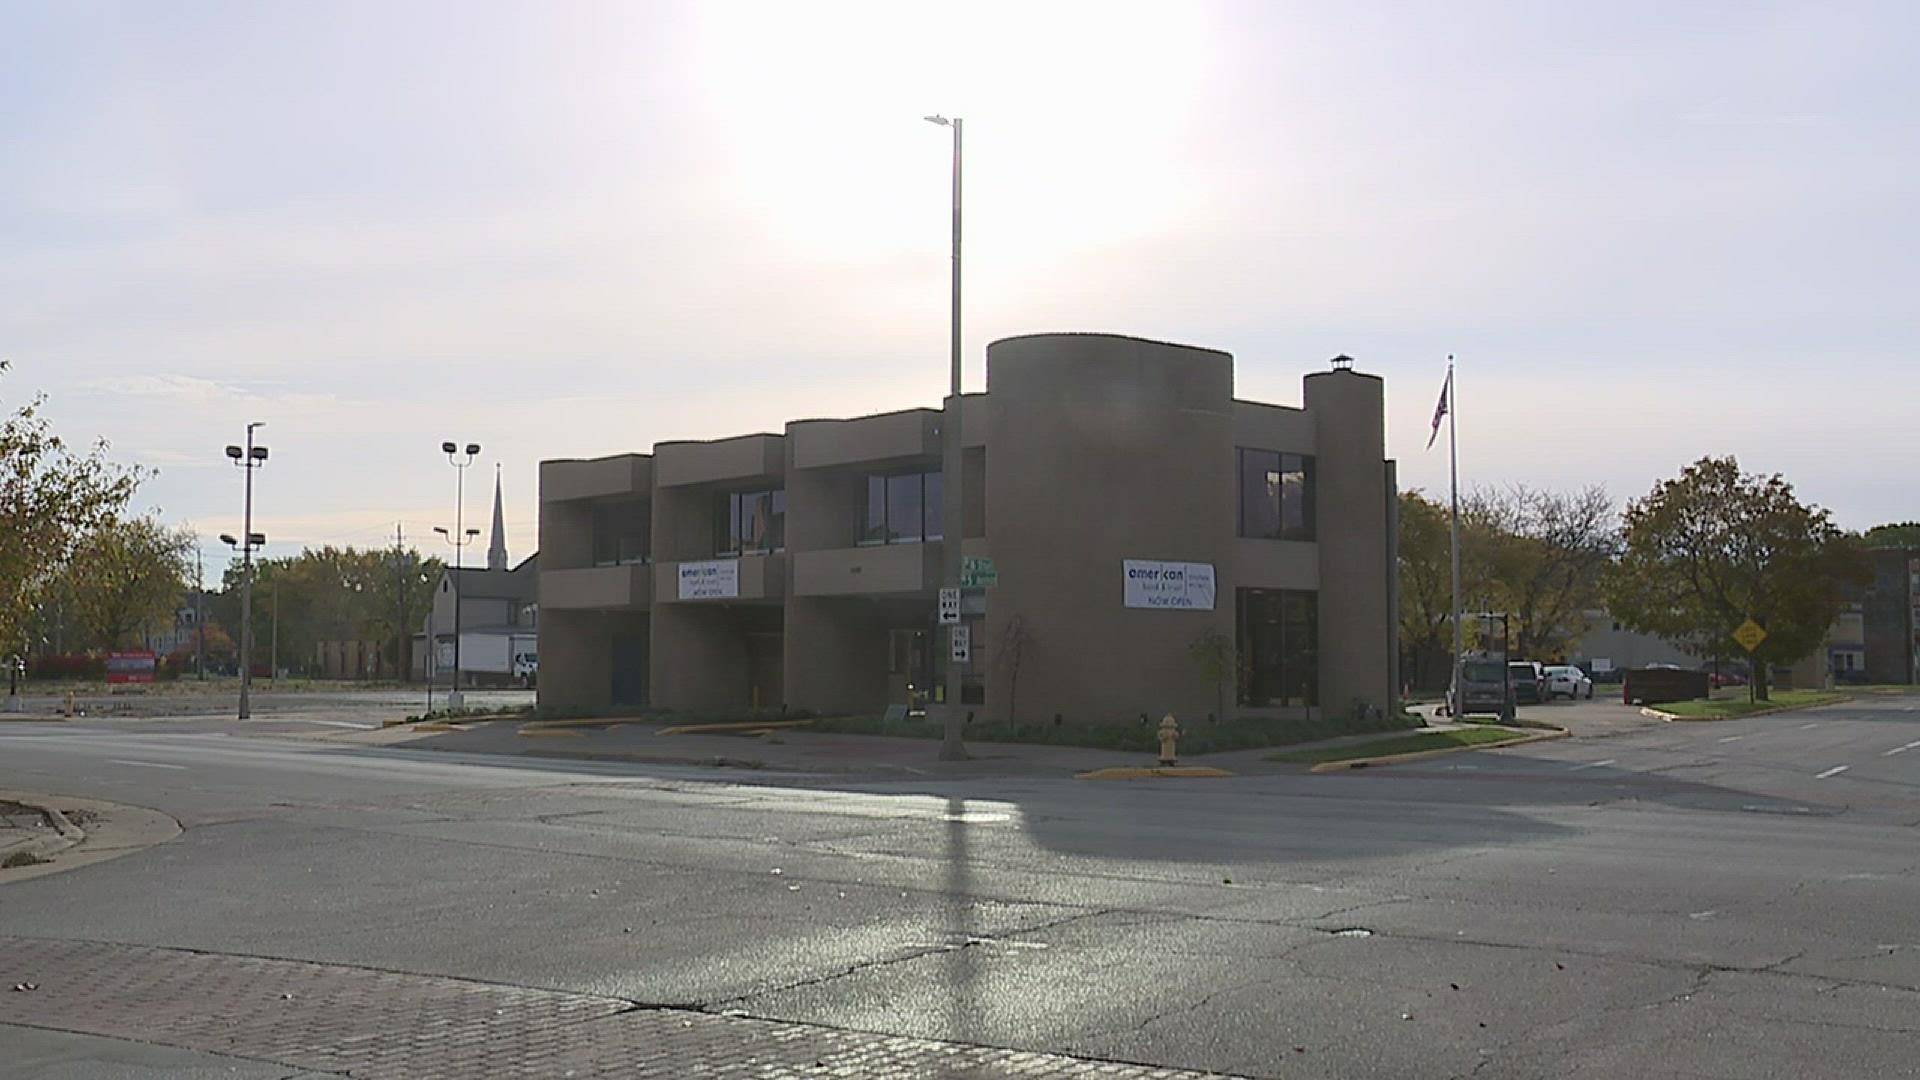 American Bank & Trust is located by Skellington Manor, about two blocks behind Rock Island City Hall.